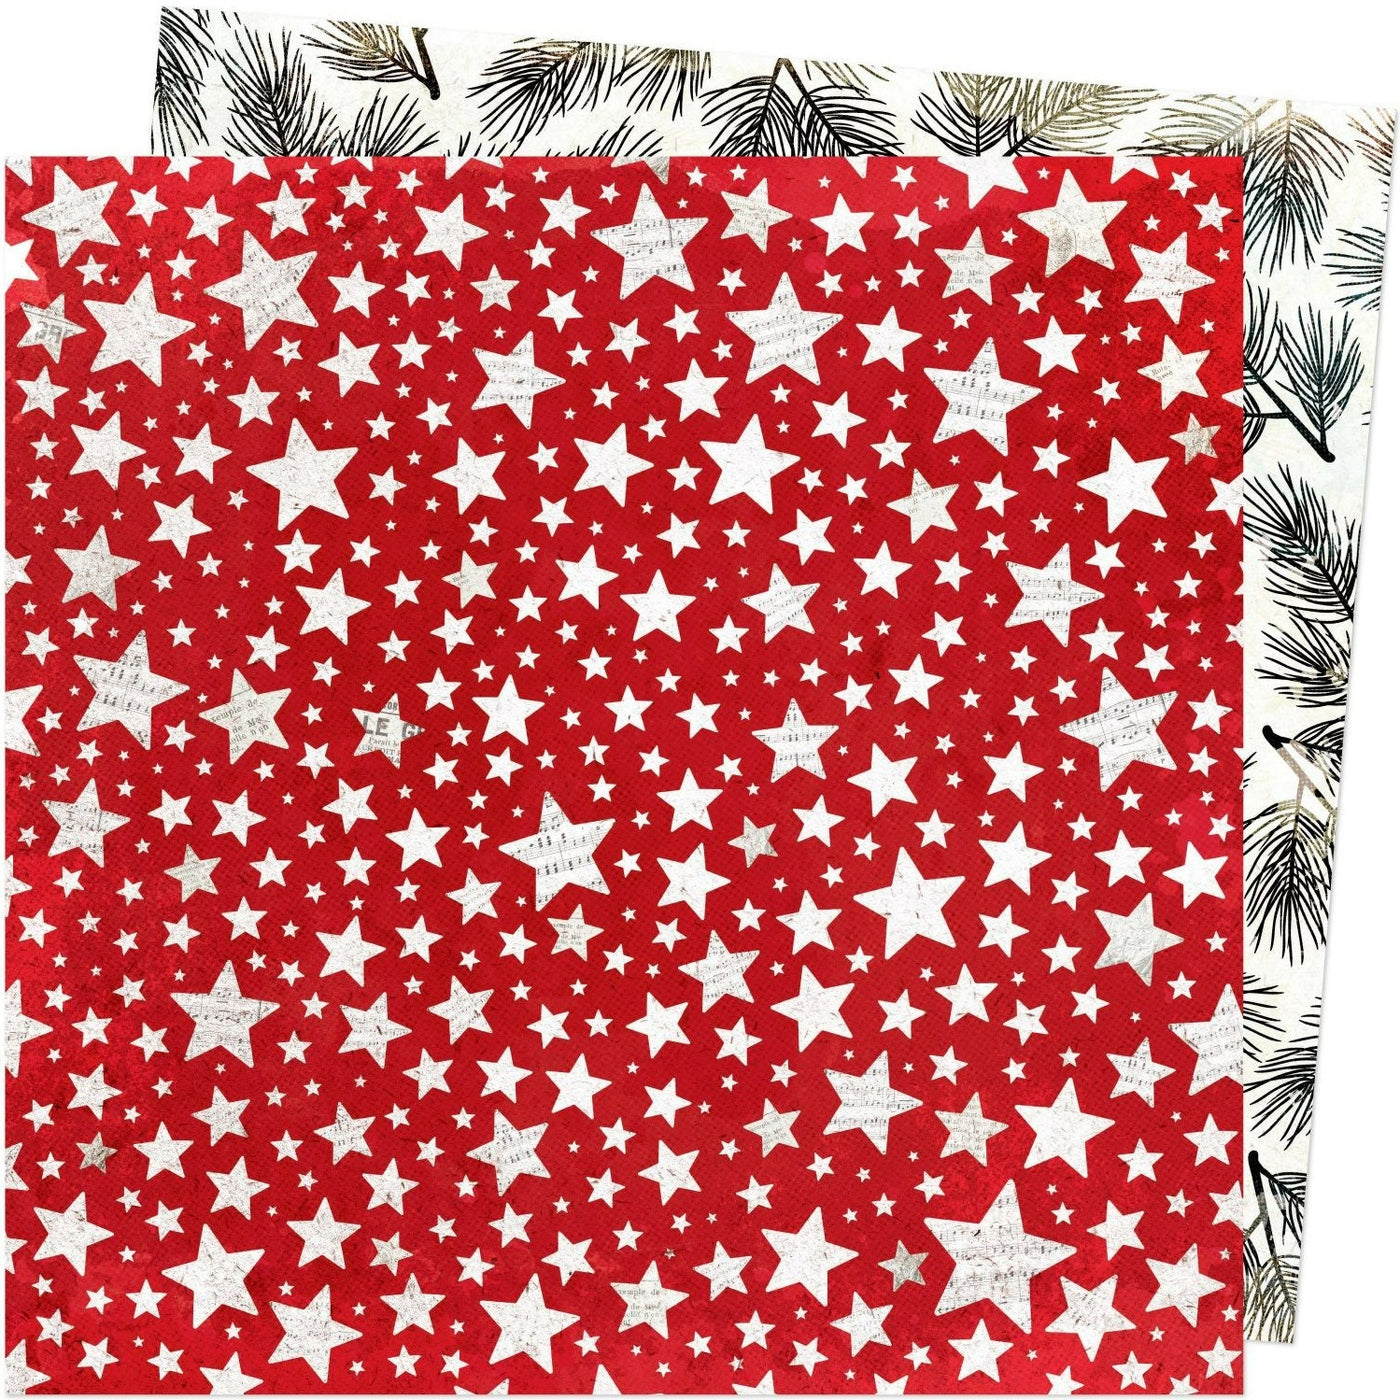 (Side A - white stars in various sizes on a red distressed background, Side B - black pine bough etchings on a white background)